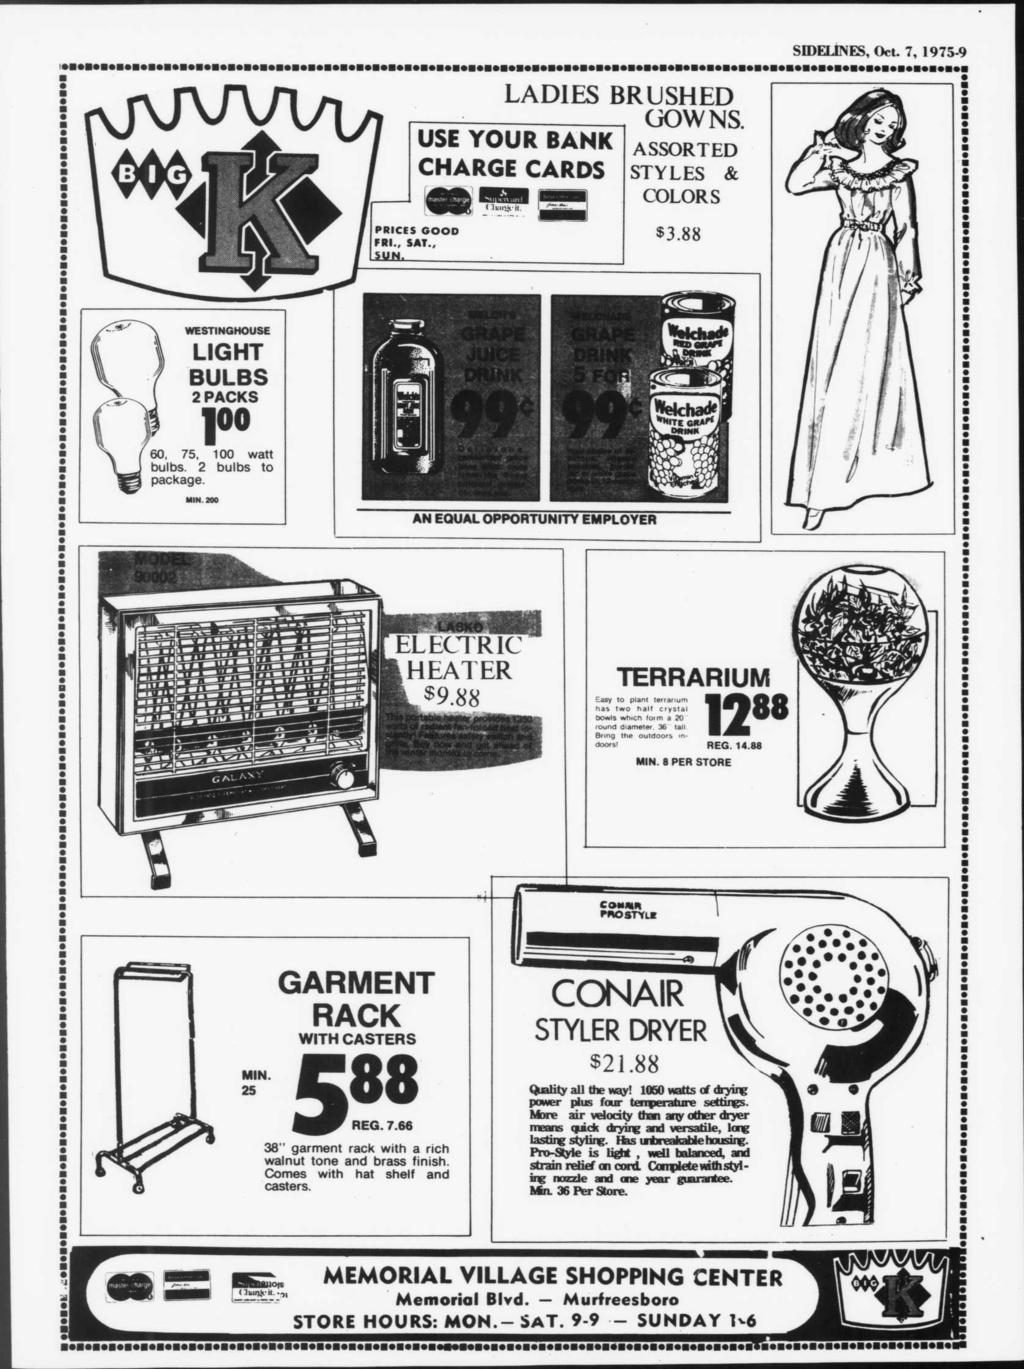 SDELNES, Oct. 7, 1975-9 LADES BRUSHED GOWNS. USE YOUR BANK ASSORTED CHARGE CARDS PRCES GOOD FR., SAT., llujl. STYLES & COLORS $3.88 WESTNG HOUSE LGHT BULBS 2PACKS 6, 75, 1 watt bulbs.